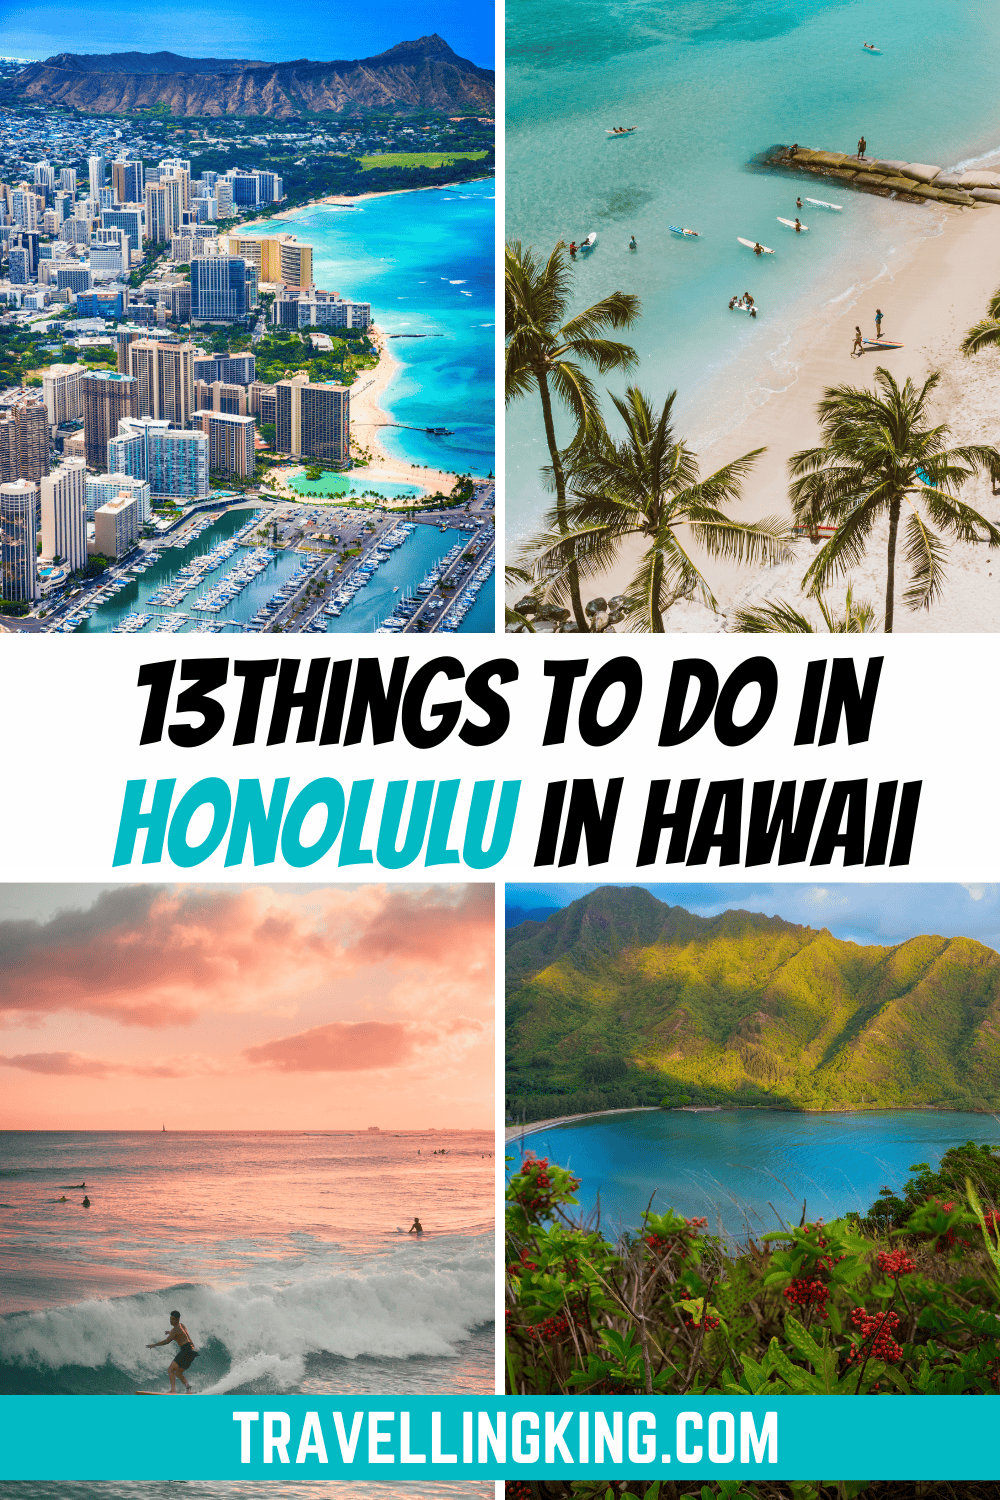 TOP 13 Exciting Things to do in Honolulu Hawaii